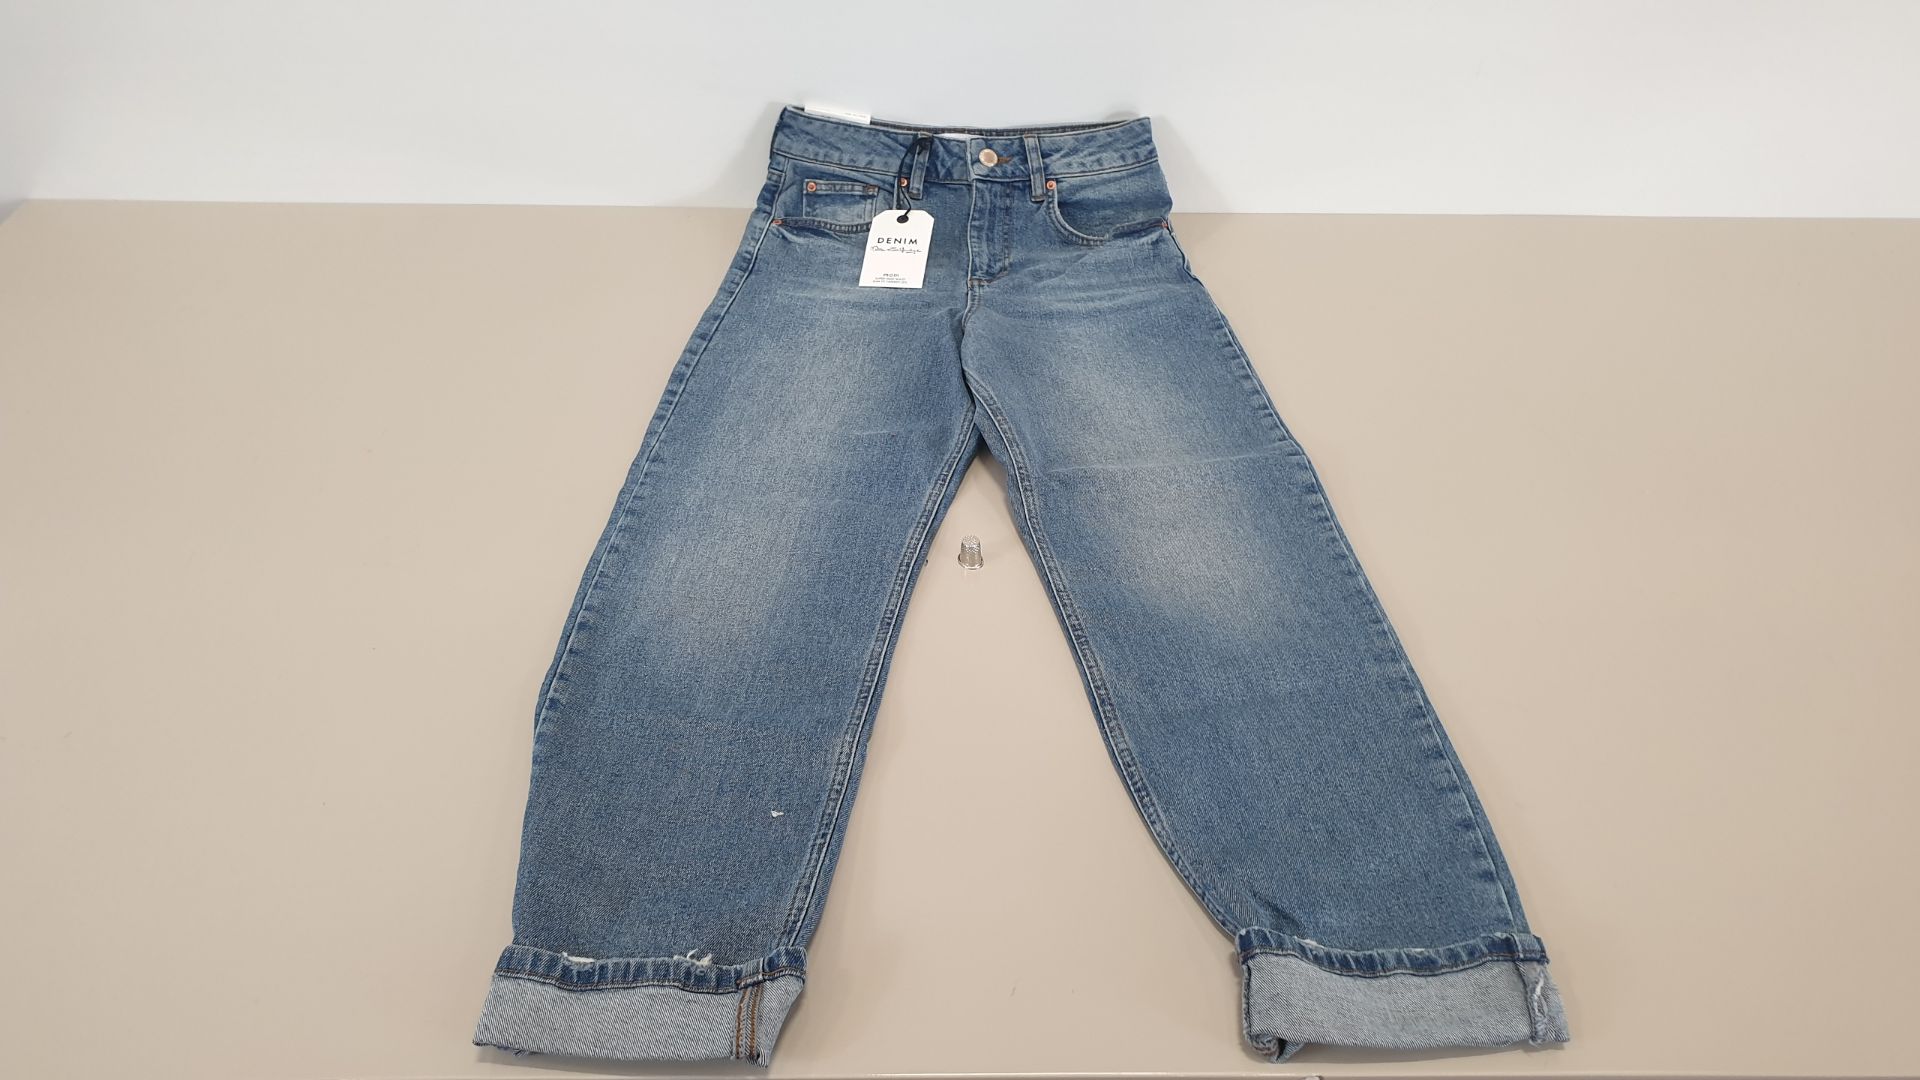 (LOT FOR THURSDAY 28TH MAY AUCTION) 9 X BRAND NEW PAIRS OF MISS SELFRIDGE CAPIO MOM DENIM JEANS -